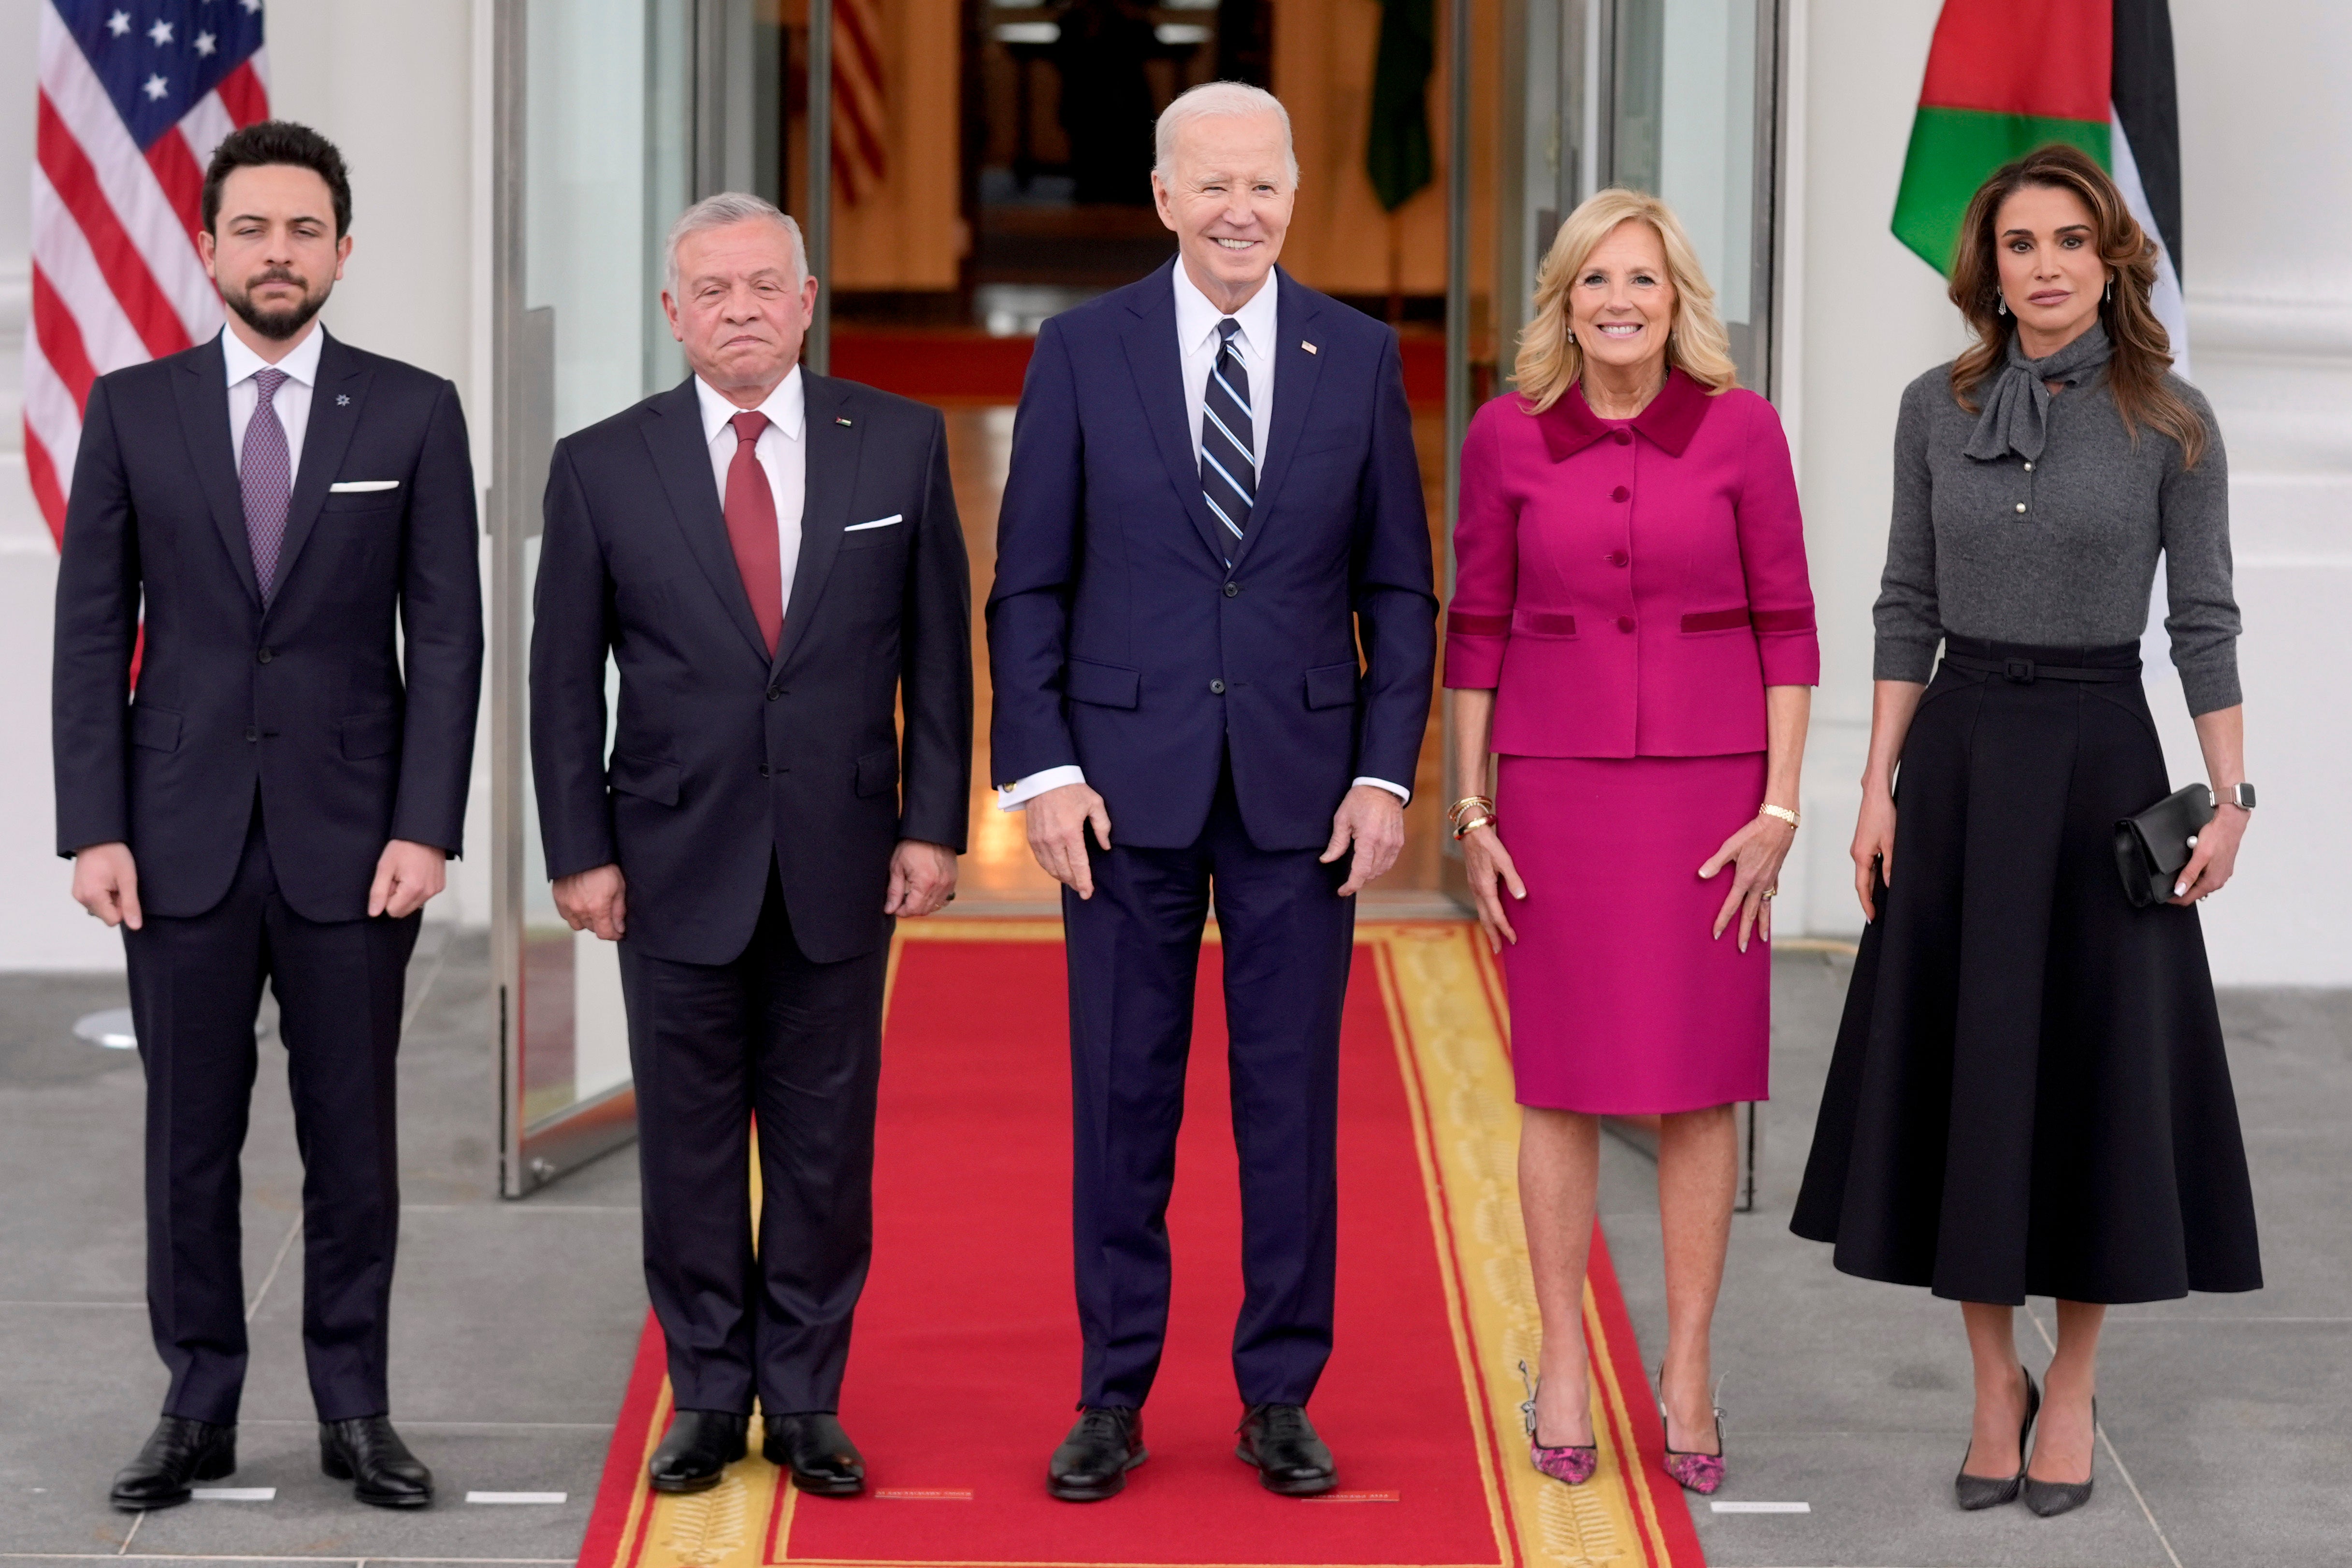 President Joe Biden, centre, and First Lady Jill Biden, second right, greet King Abdullah of Jordan, second left, Queen Rania, right, and Crown Prince Hussein, left, at the White House